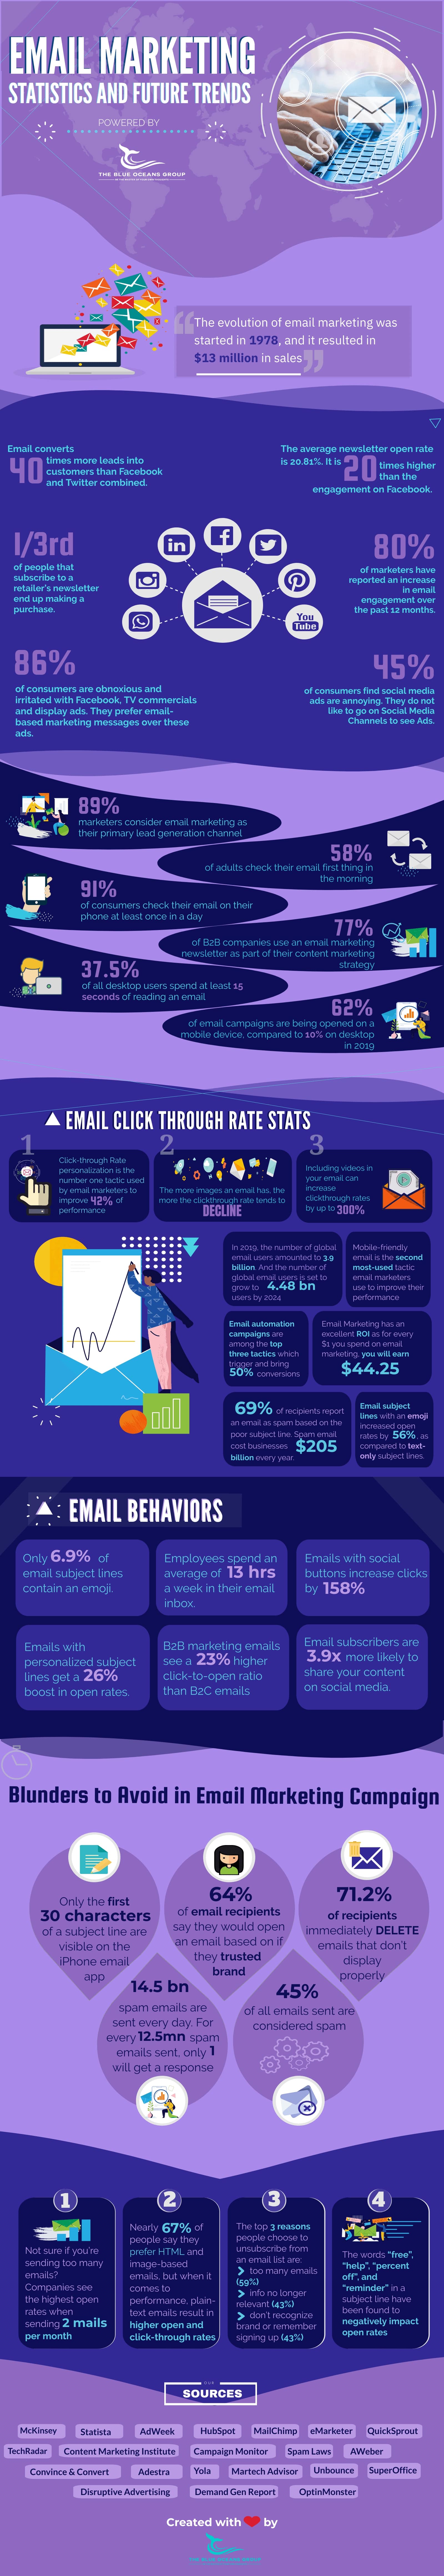 The Current Email Marketing Statistics and Trends